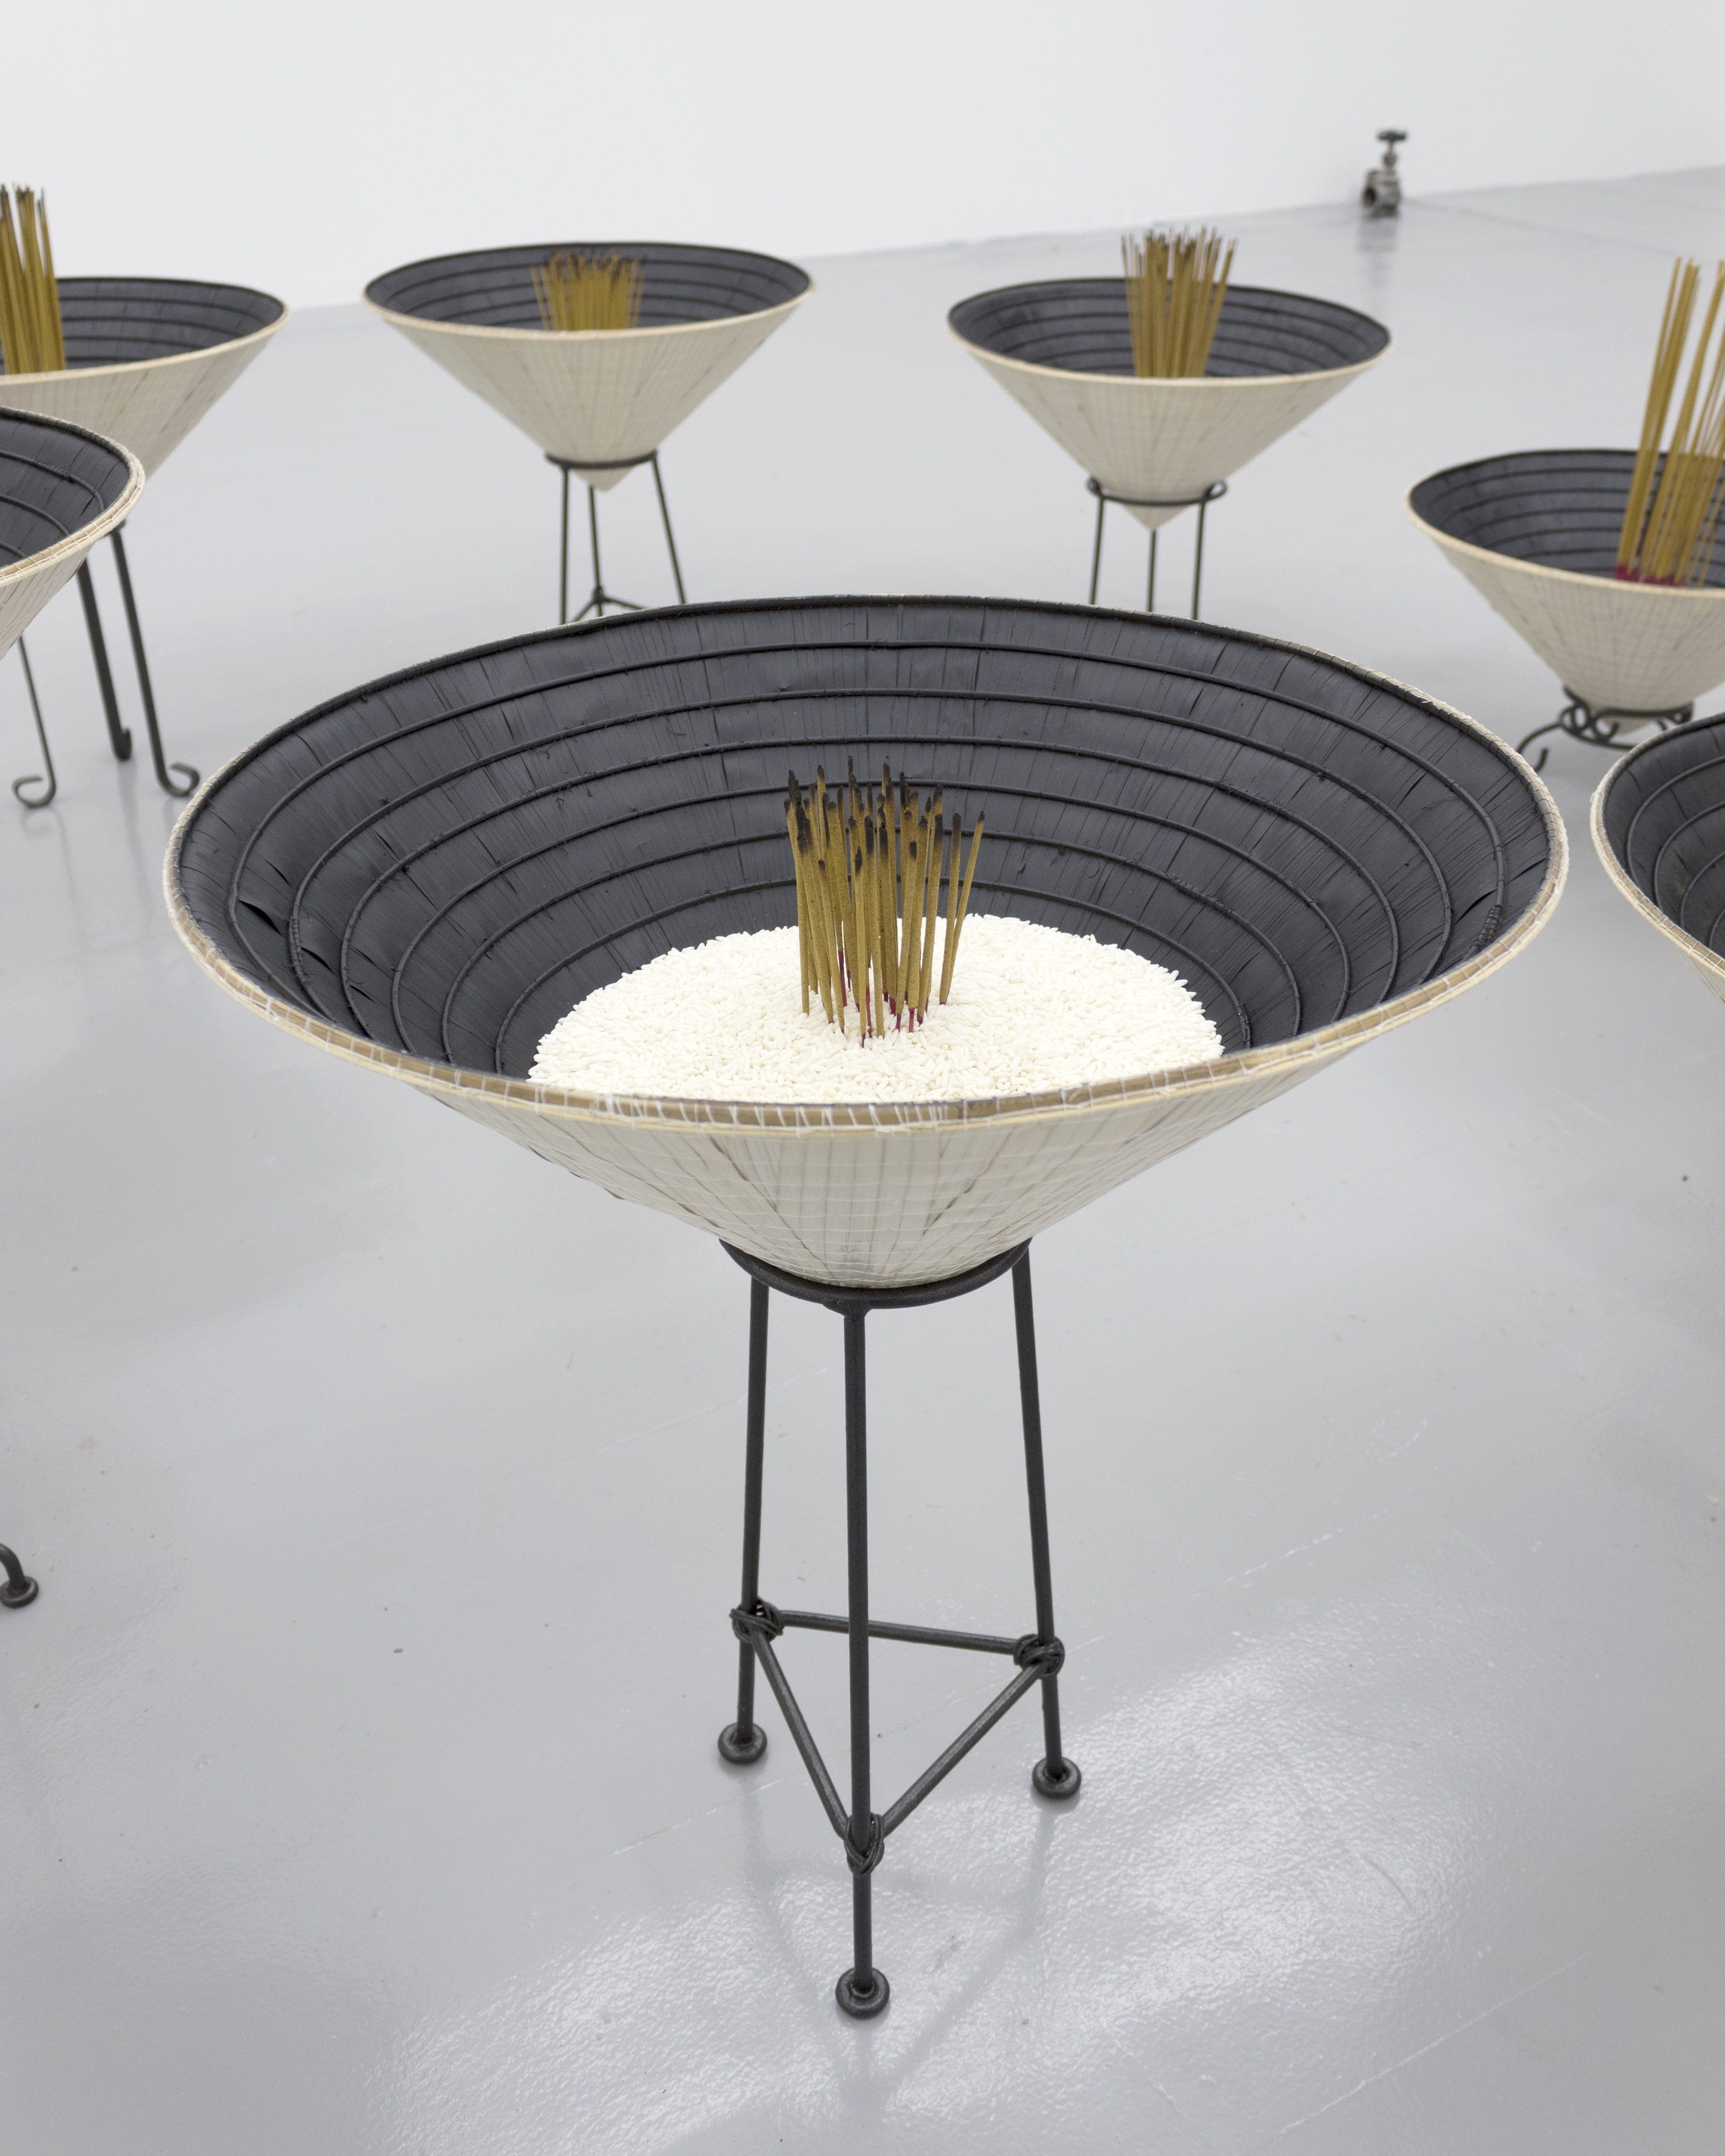  Millian Giang Lien Pham,  Reforge: 9 Phases (Seven),  2019. Conical hat, sweet rice, incense, metal stand 